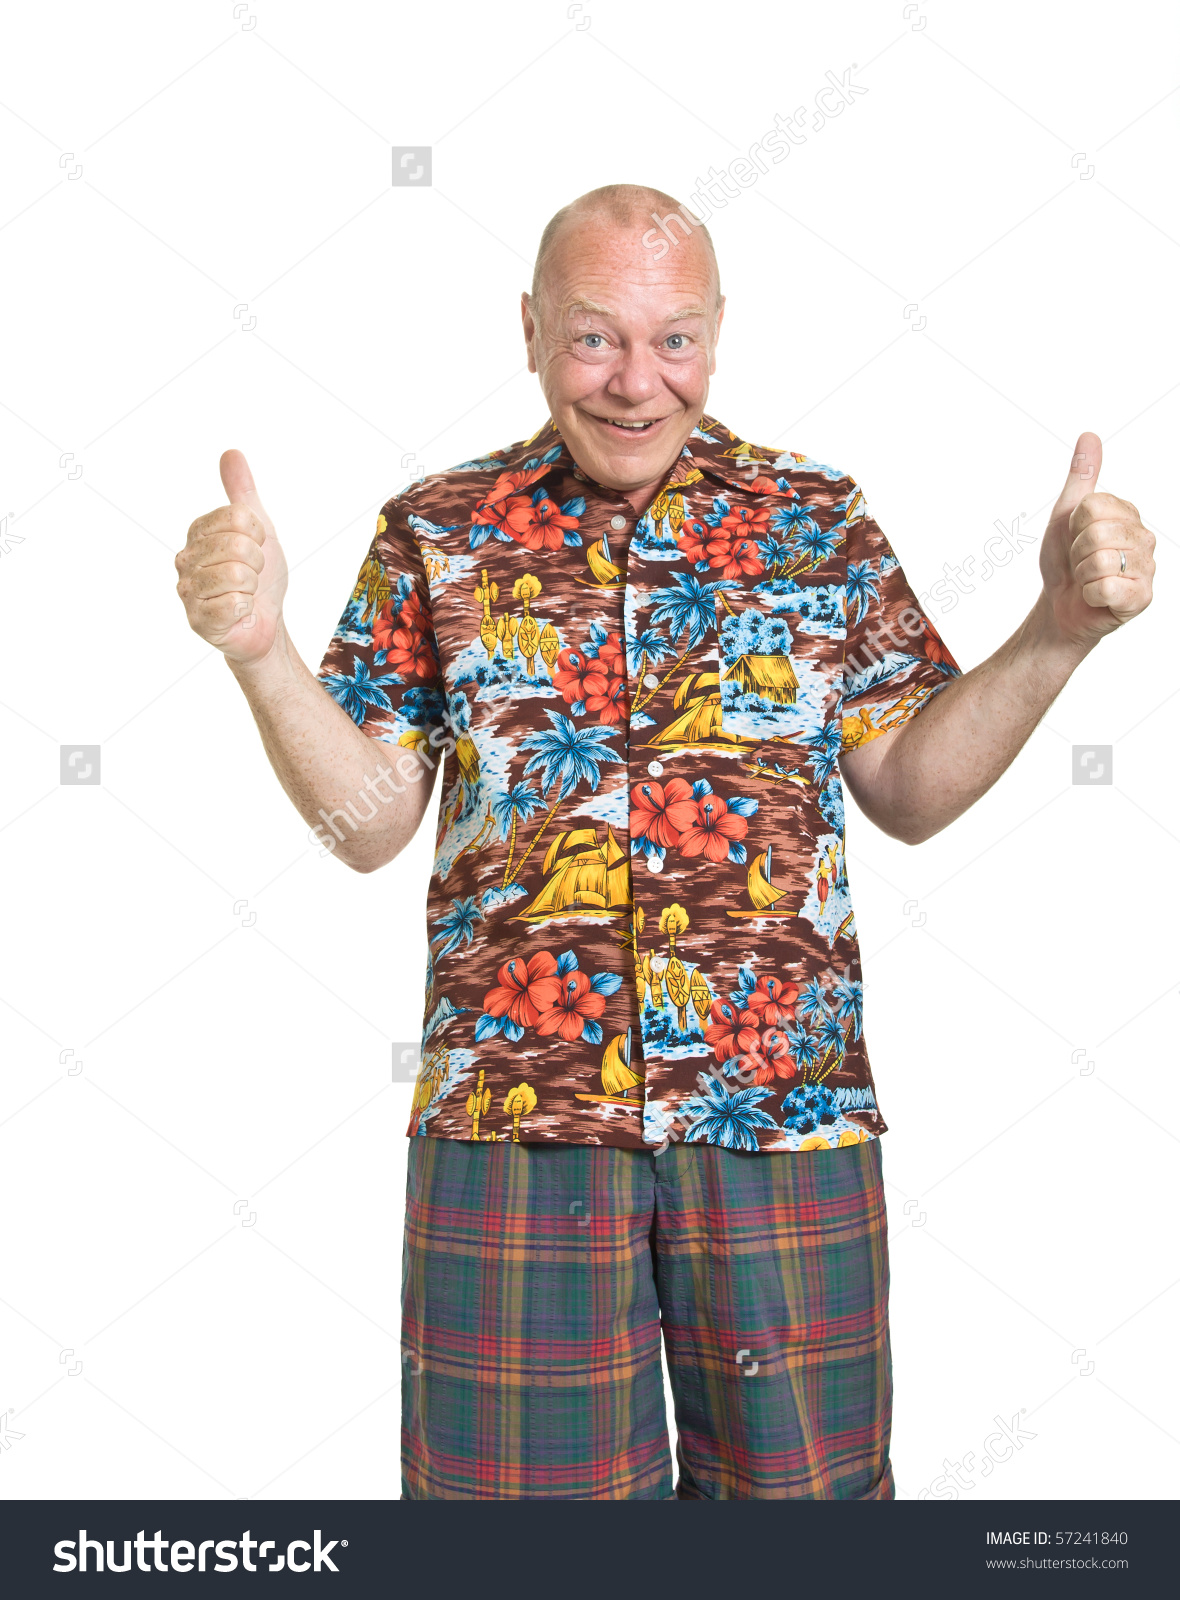 Name:  stock-photo-expressive-old-man-in-loud-shirt-holiday-concept-isolated-against-white-57241840.jpg
Views: 324
Size:  596.1 KB